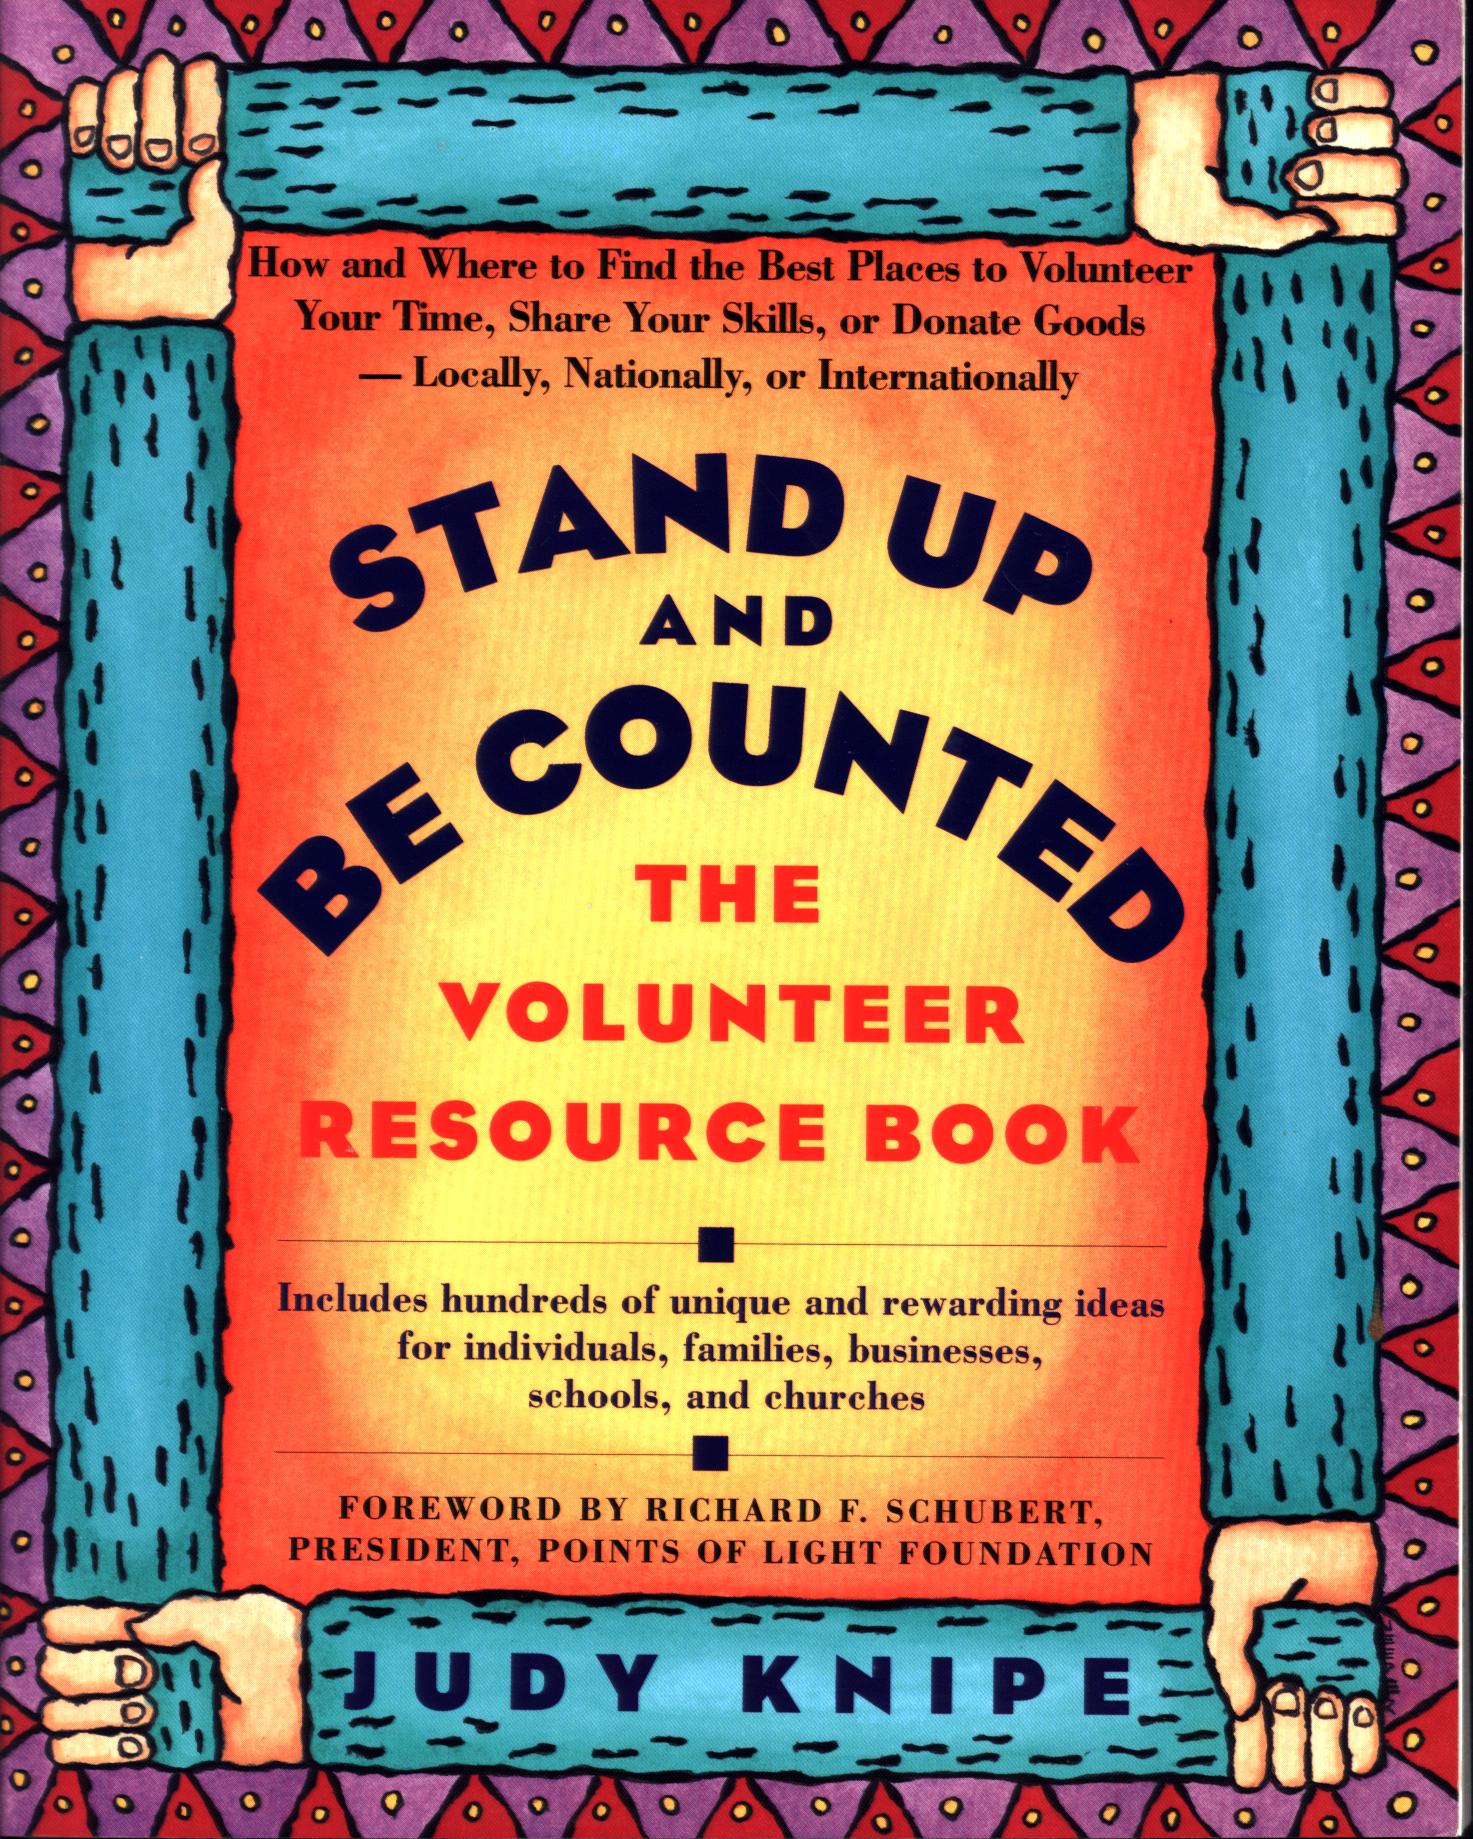 STAND UP AND BE COUNTED: the volunteer resource book. 